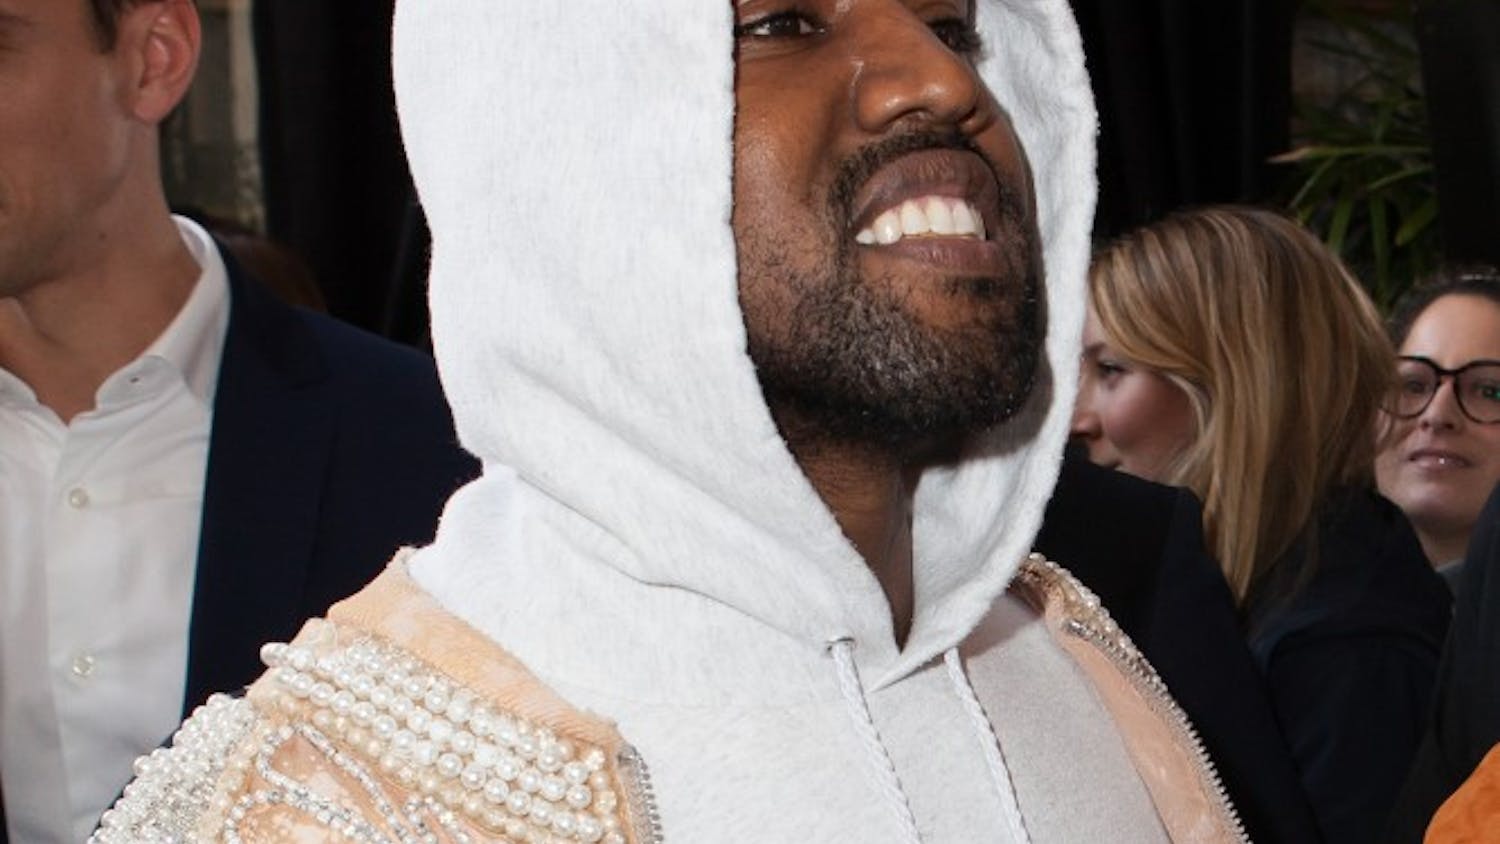 Kanye West attends the Balmain show at Paris Fashion Week on March 3, 2016. (Audrey Poree/Abaca Press/TNS)